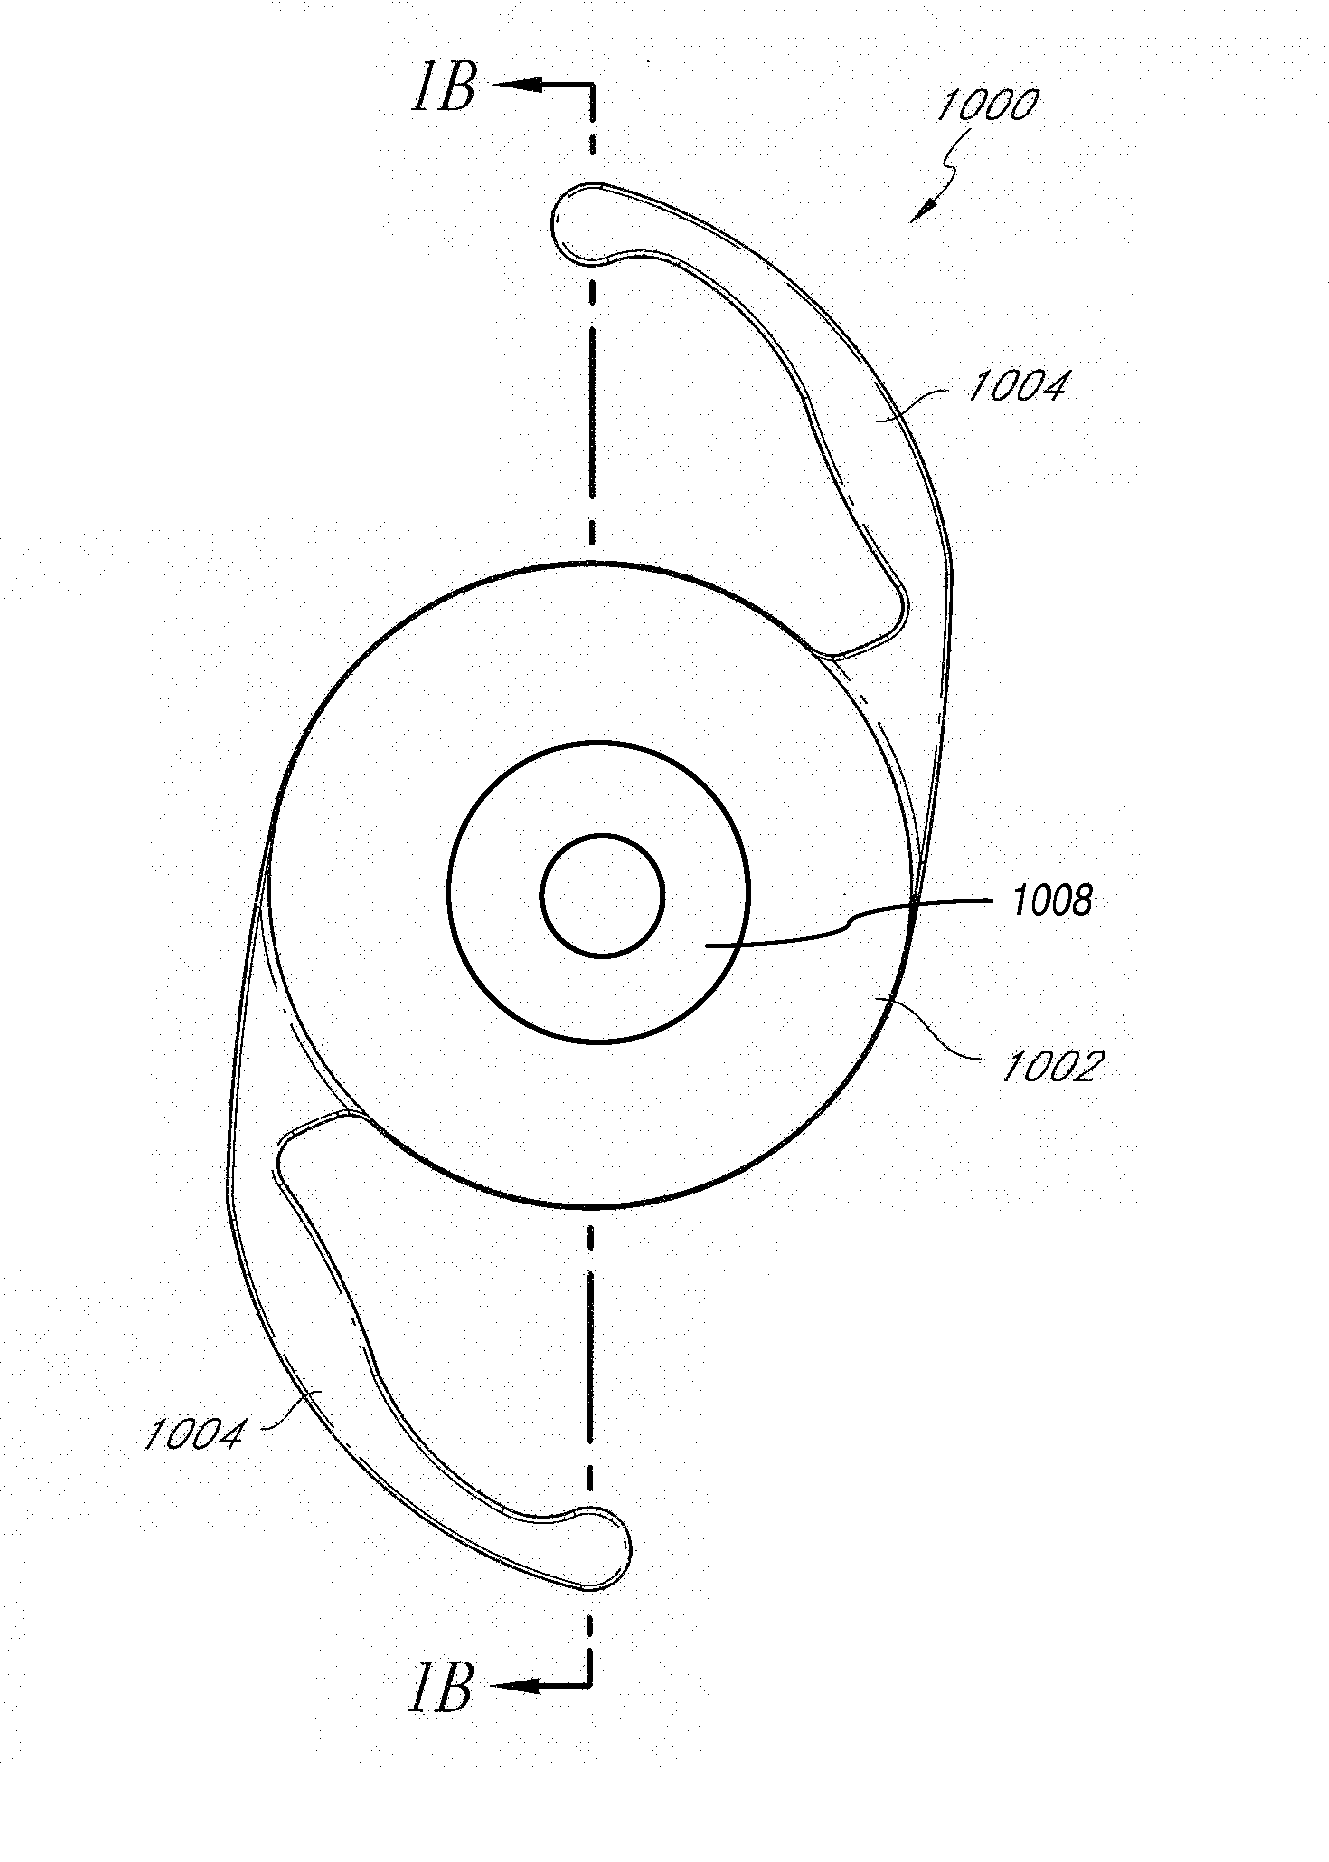 Process for manufacturing an intraocular lens